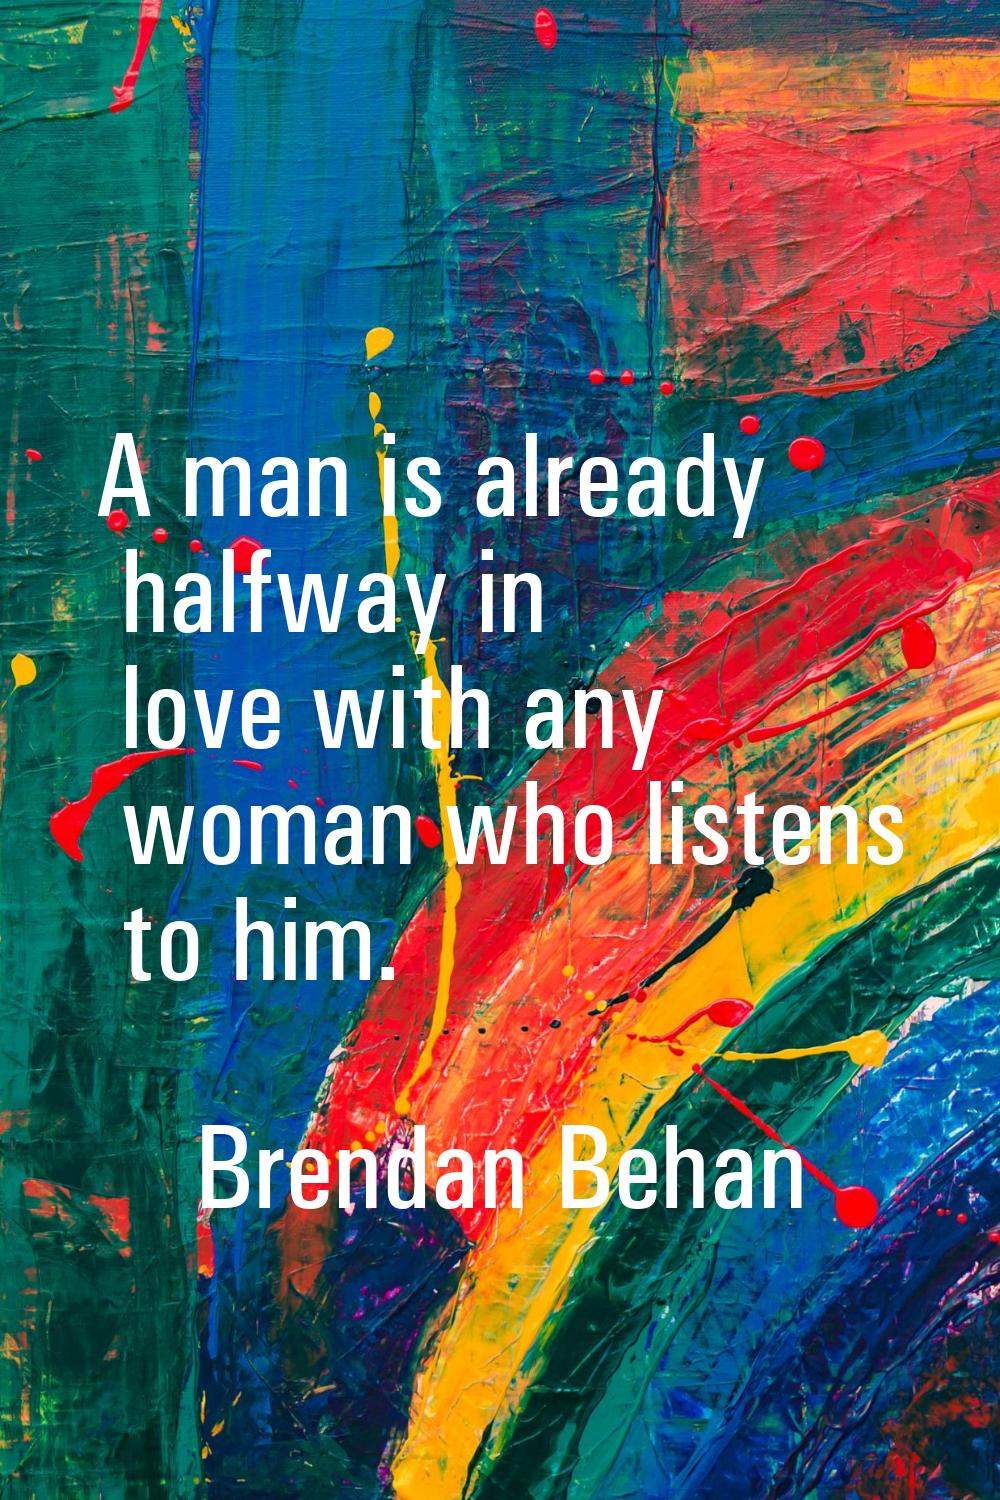 A man is already halfway in love with any woman who listens to him.